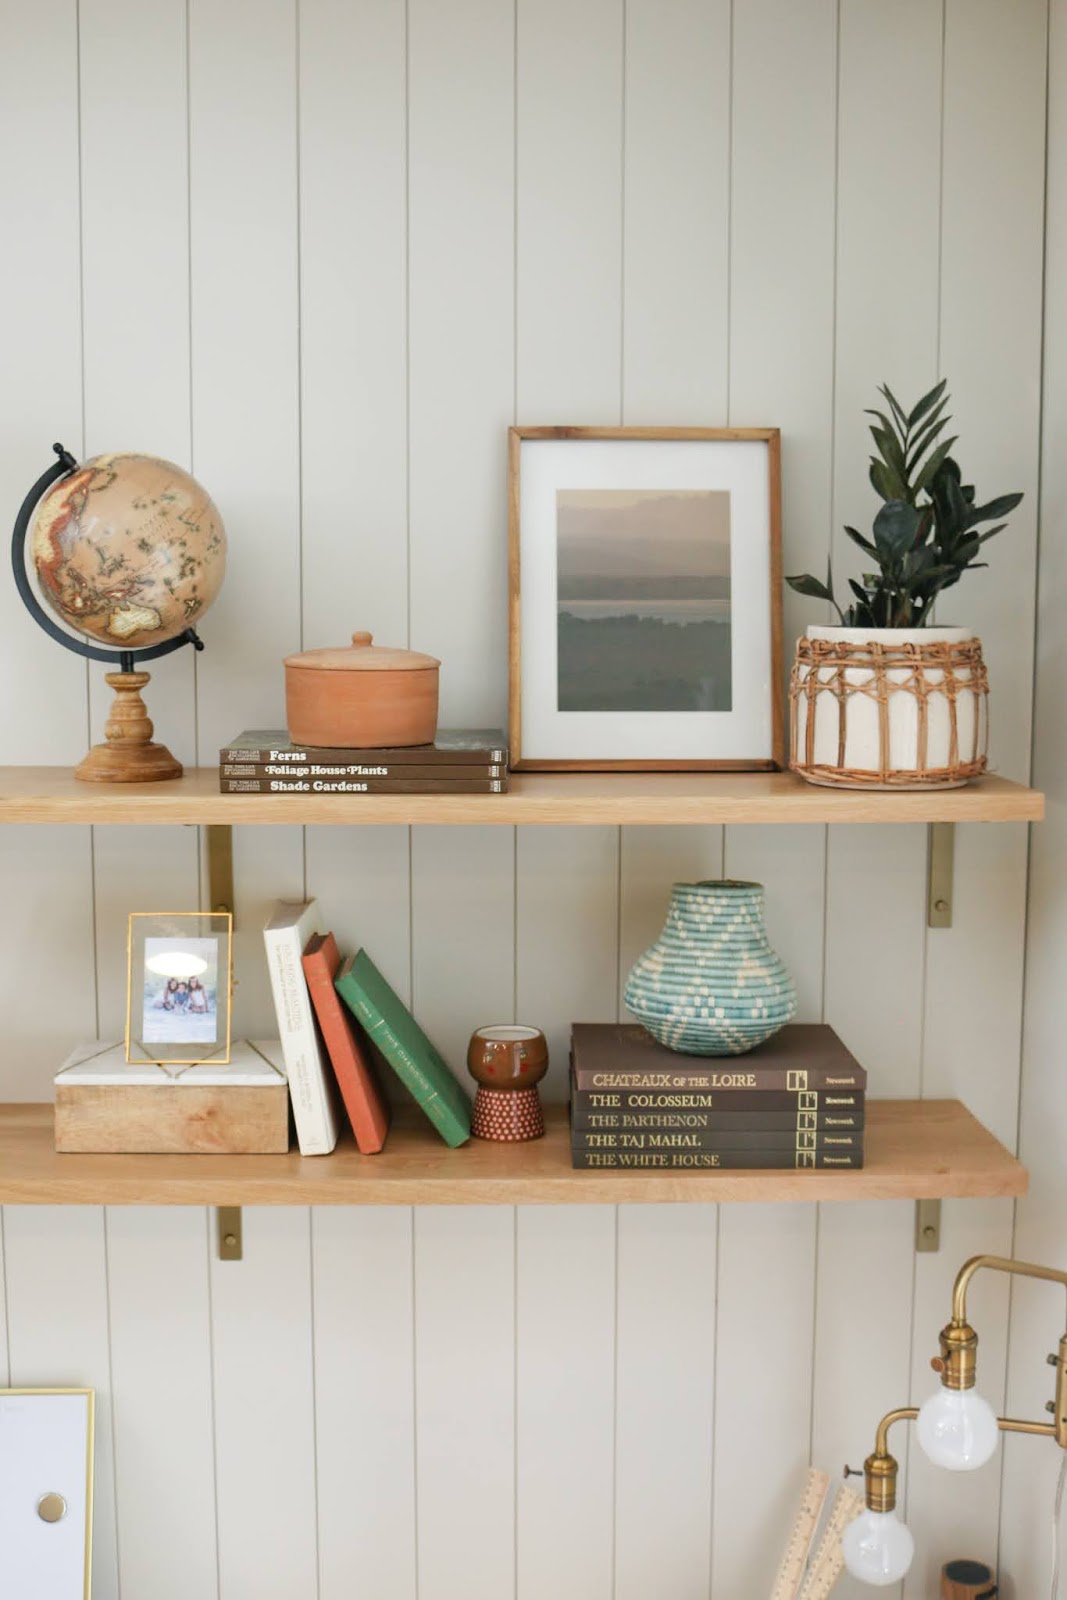 Small Home Offices: Designing A Productive Nook In Limited Space